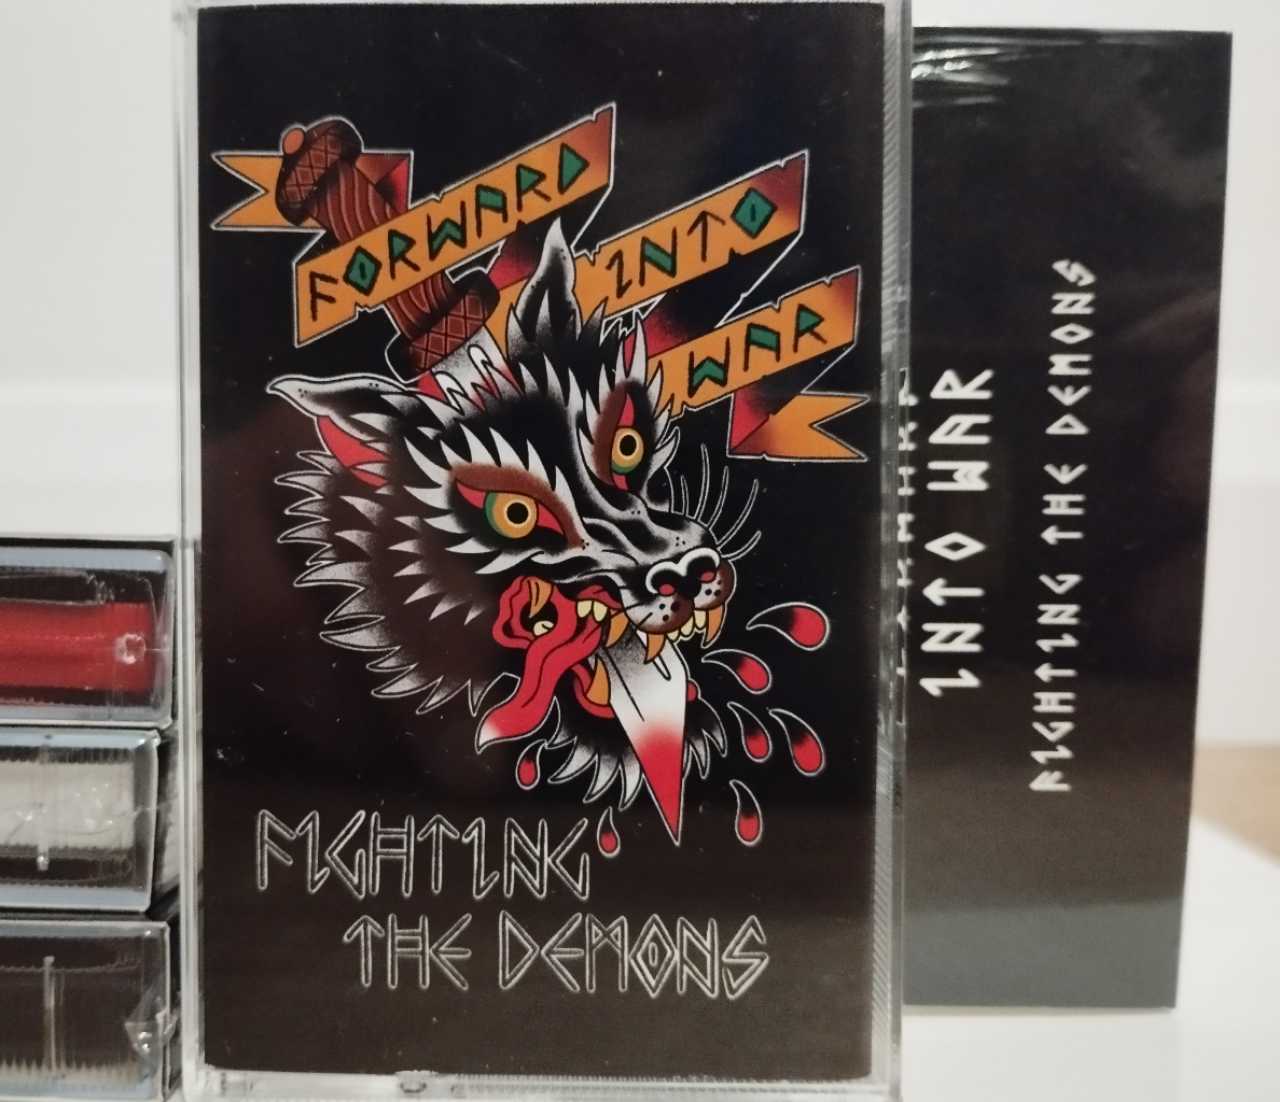 Forward Into War "Fighting The Demons" Tape